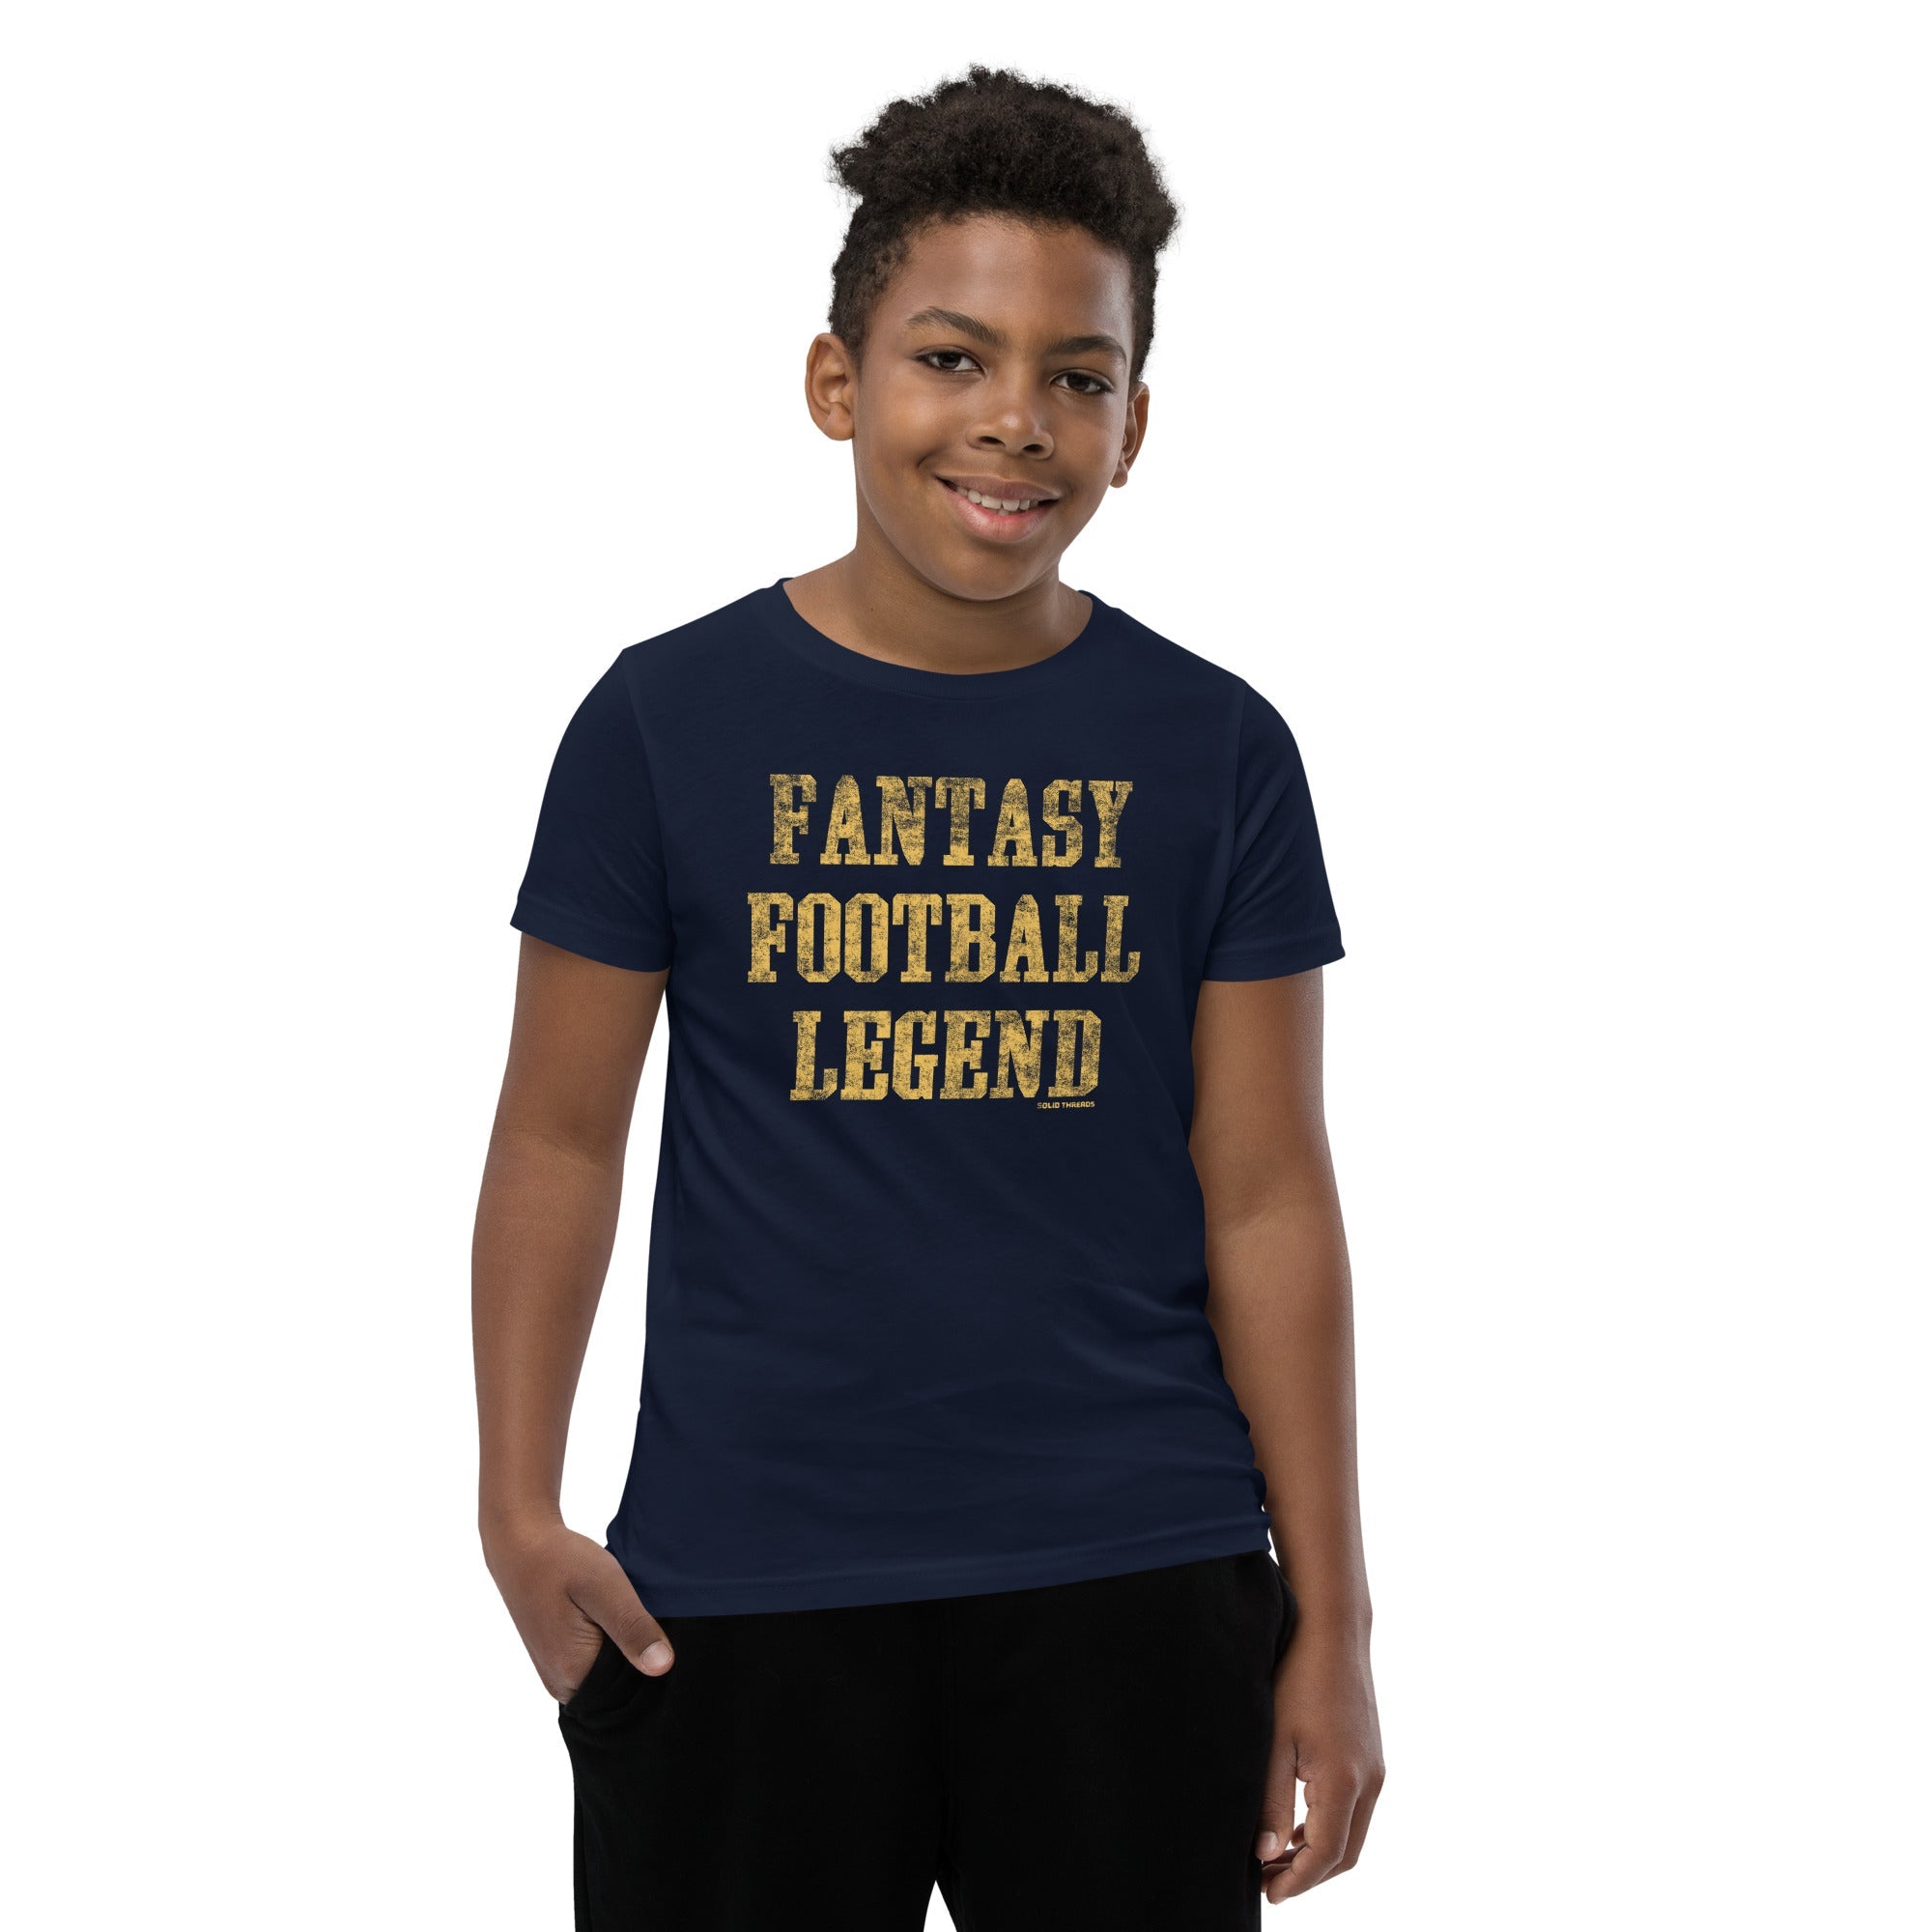 Youth Fantasy Football Legend Extra Soft T-Shirt | Funny Sports Kids Tee Boy Model | Solid Threads